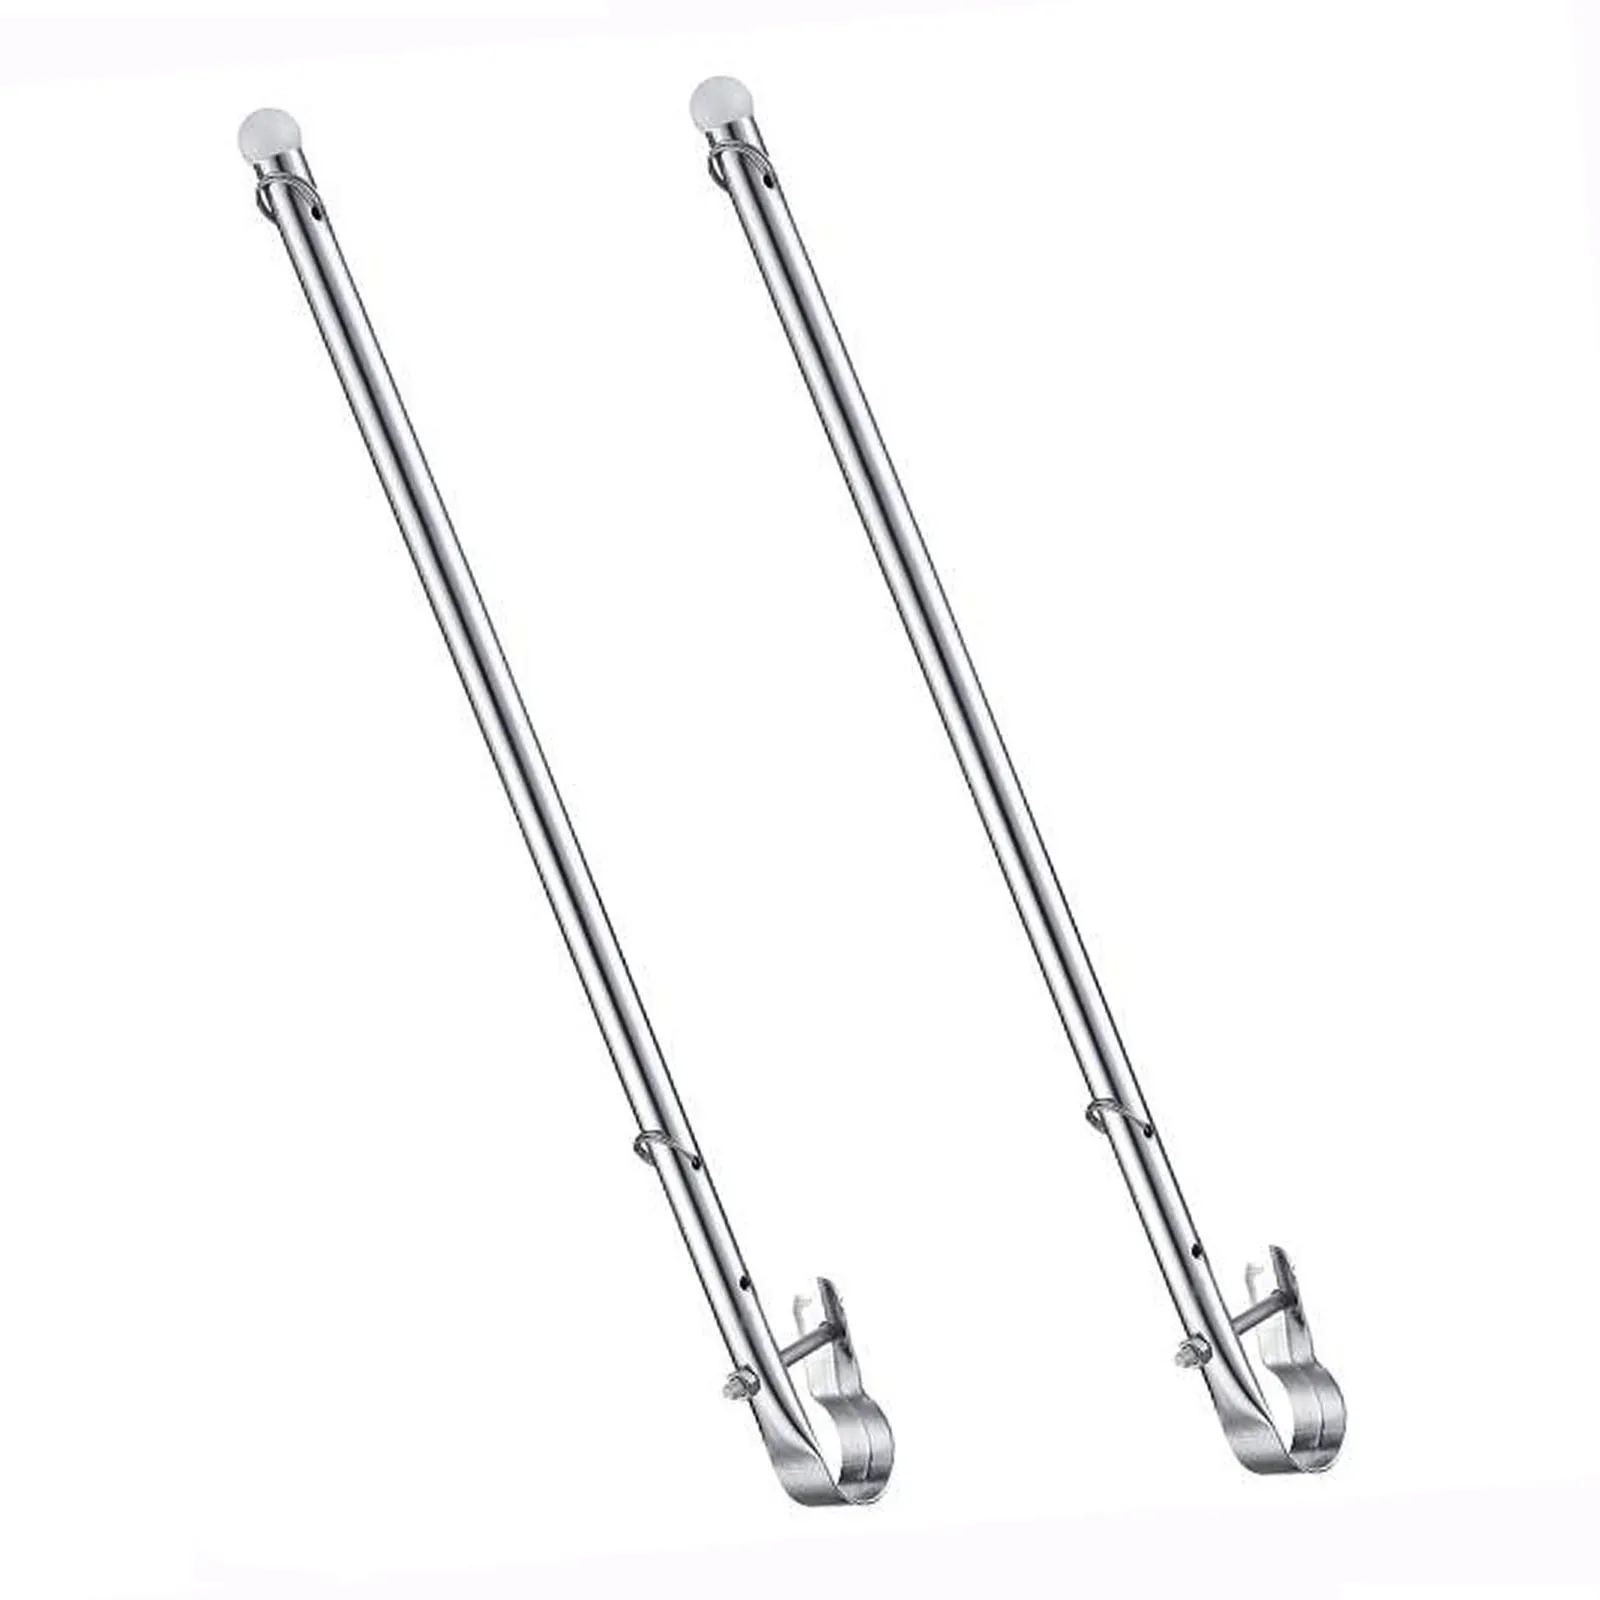 2Pcs Marine Stainless Steel Removable Flag Pole Dinghy Raise Boat Yacht Camper Flag Pole For Rail 7/8